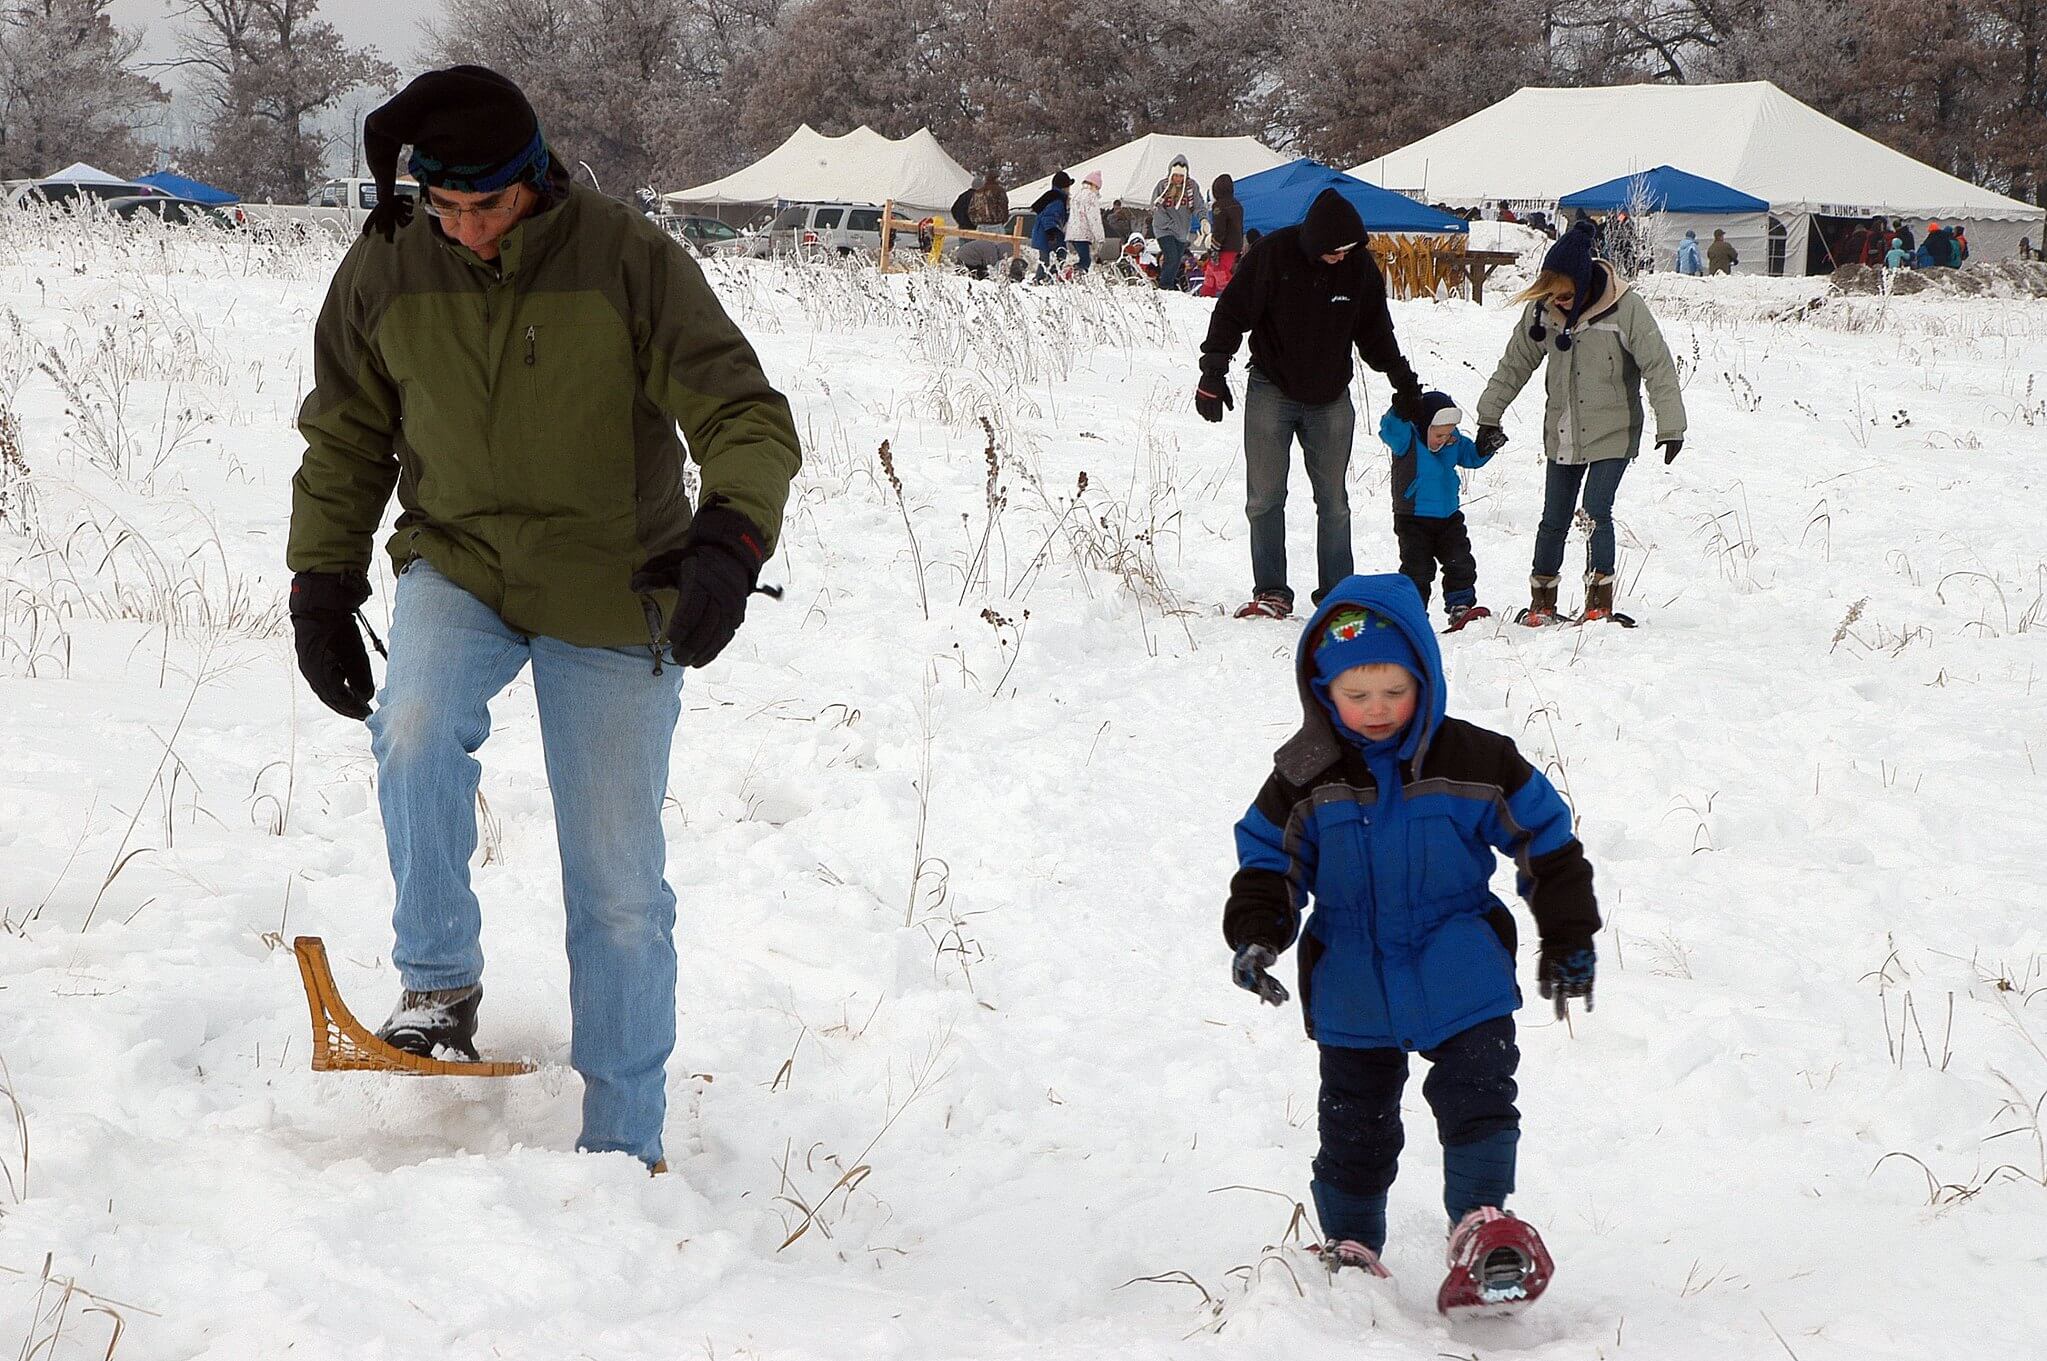 Snowshoeing in Wisconsin. Parks and trails saw increased interest during the pandemic and need increased funding, like from the Knowles-Nelson Stewardship Program, to support them.